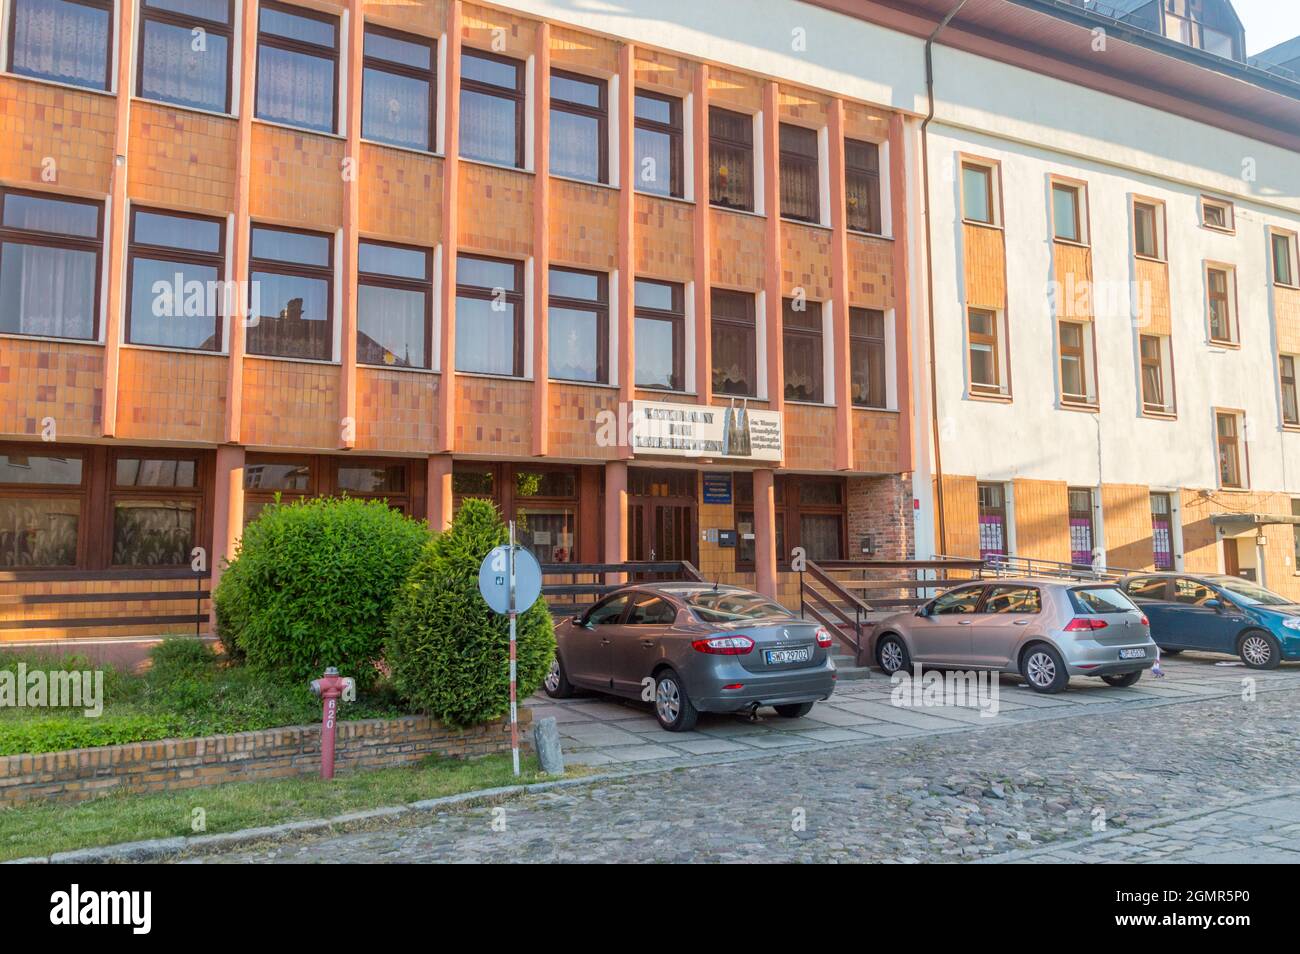 Opole, Poland - June 4, 2021: Cathedral catechetical house. Stock Photo